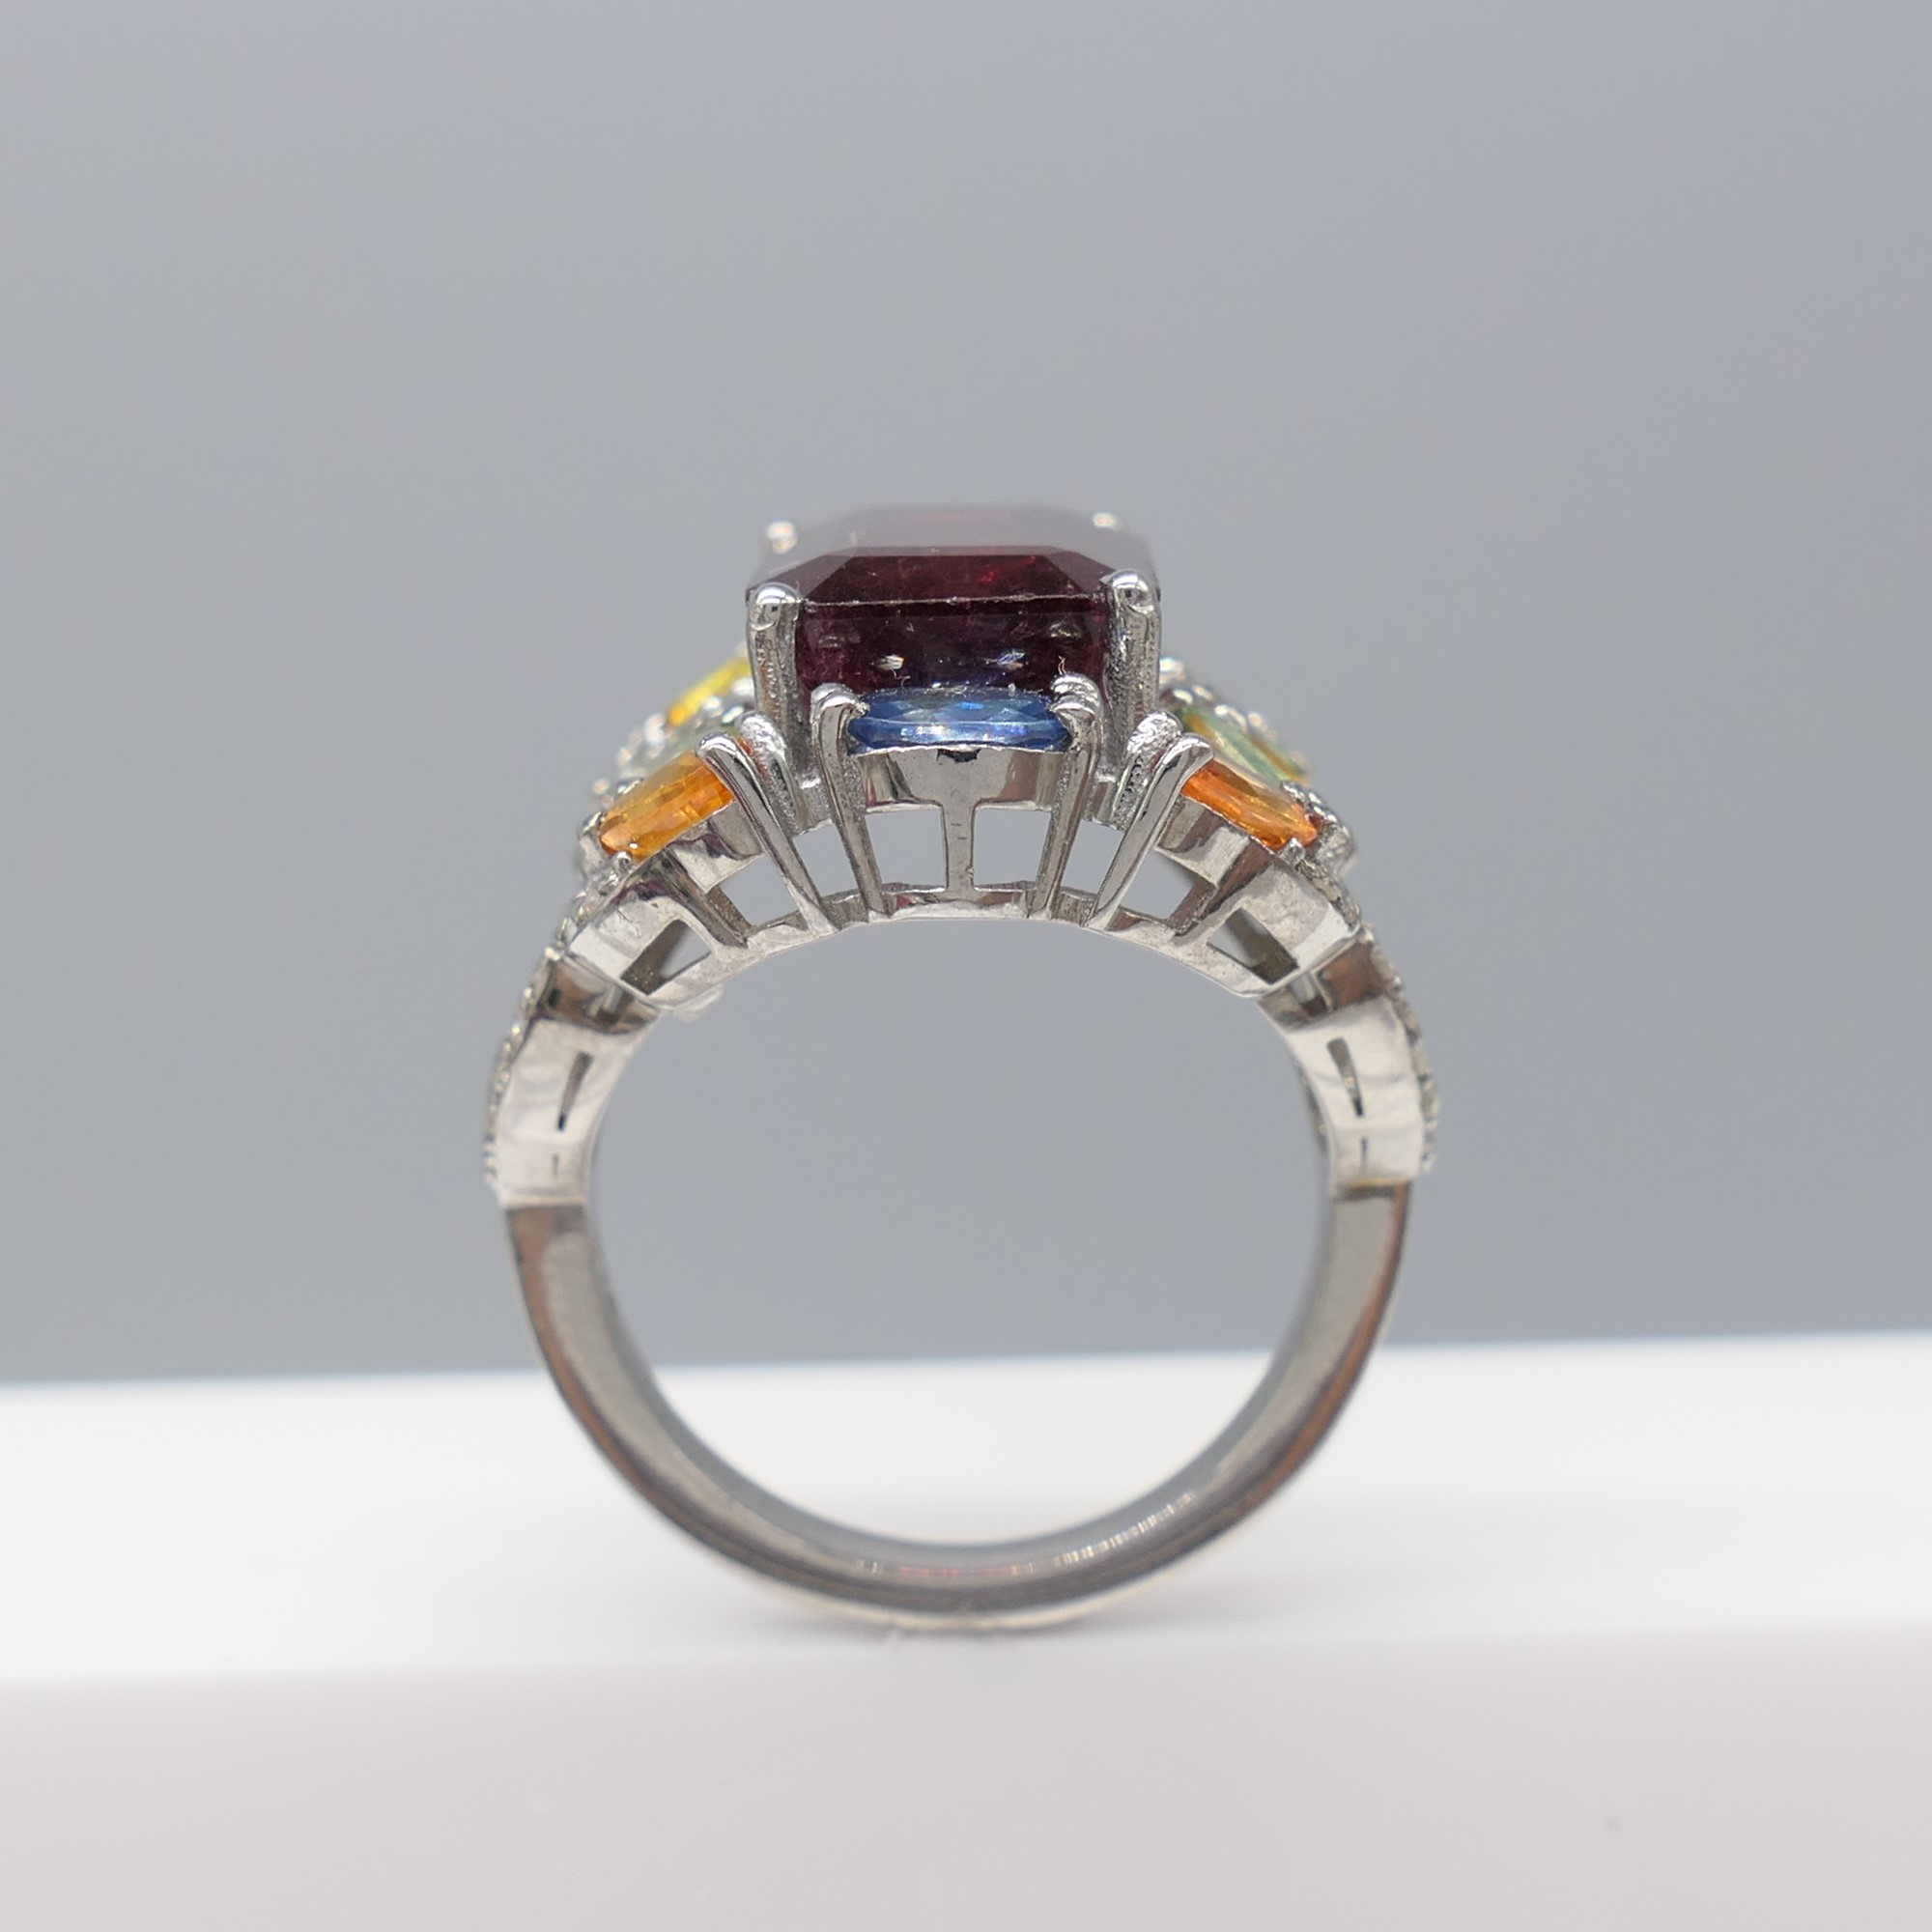 Large Dress Ring Set With Tourmaline, Multi-Coloured Sapphires and Diamonds - Image 4 of 7